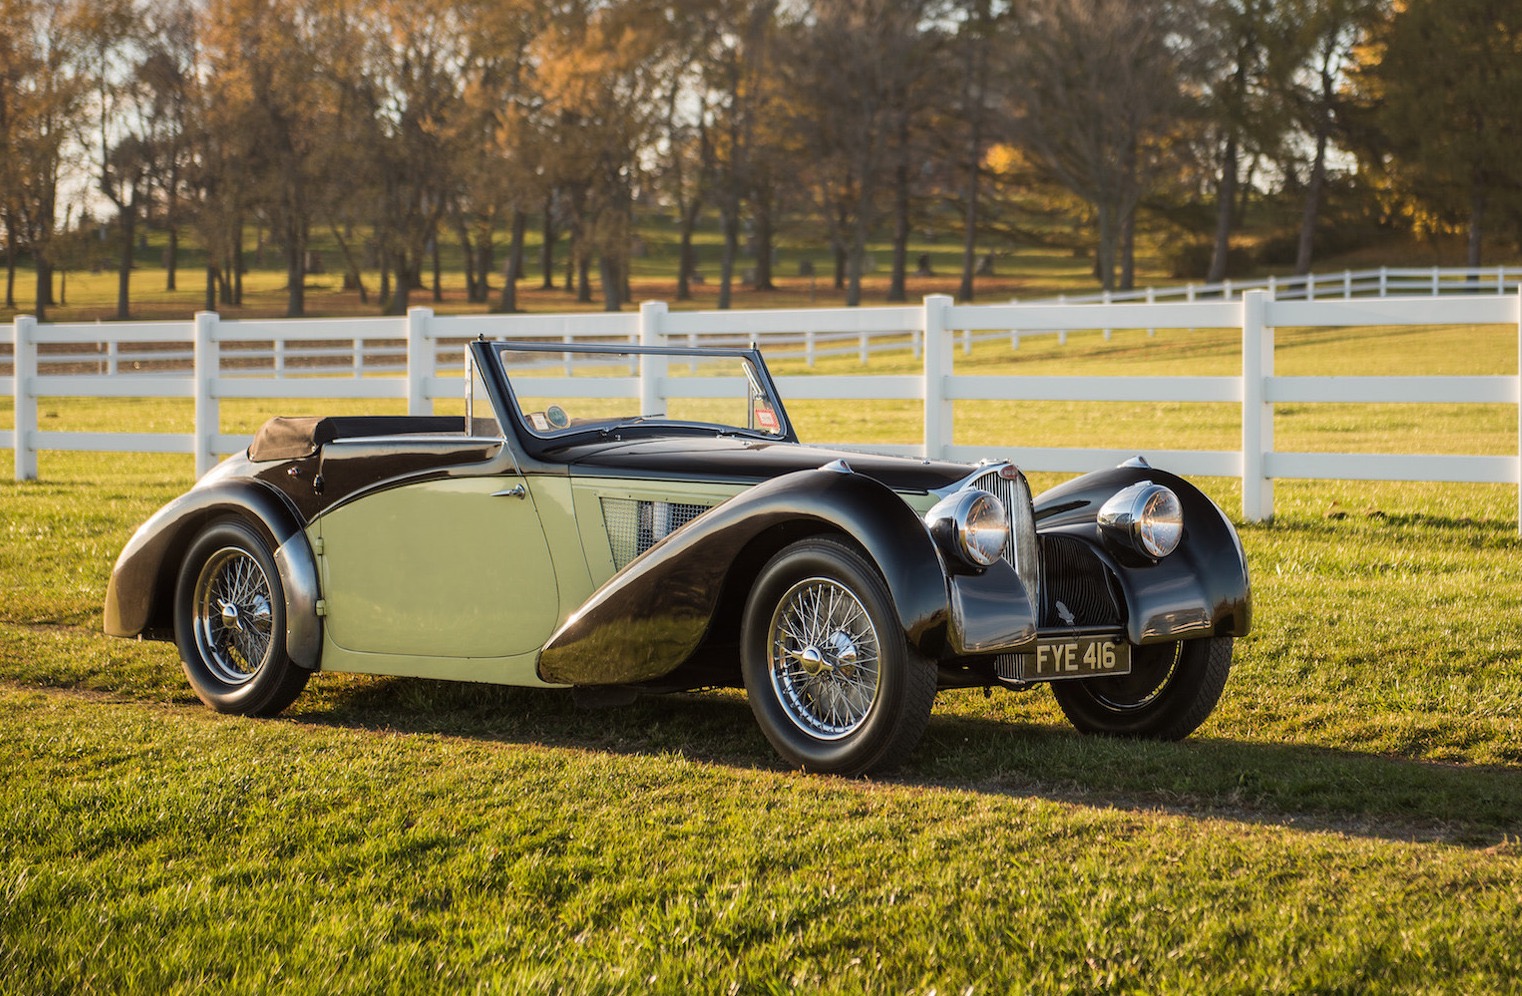 For Sale: Mint 1937 Bugatti Type 57S, expected to fetch over $8m